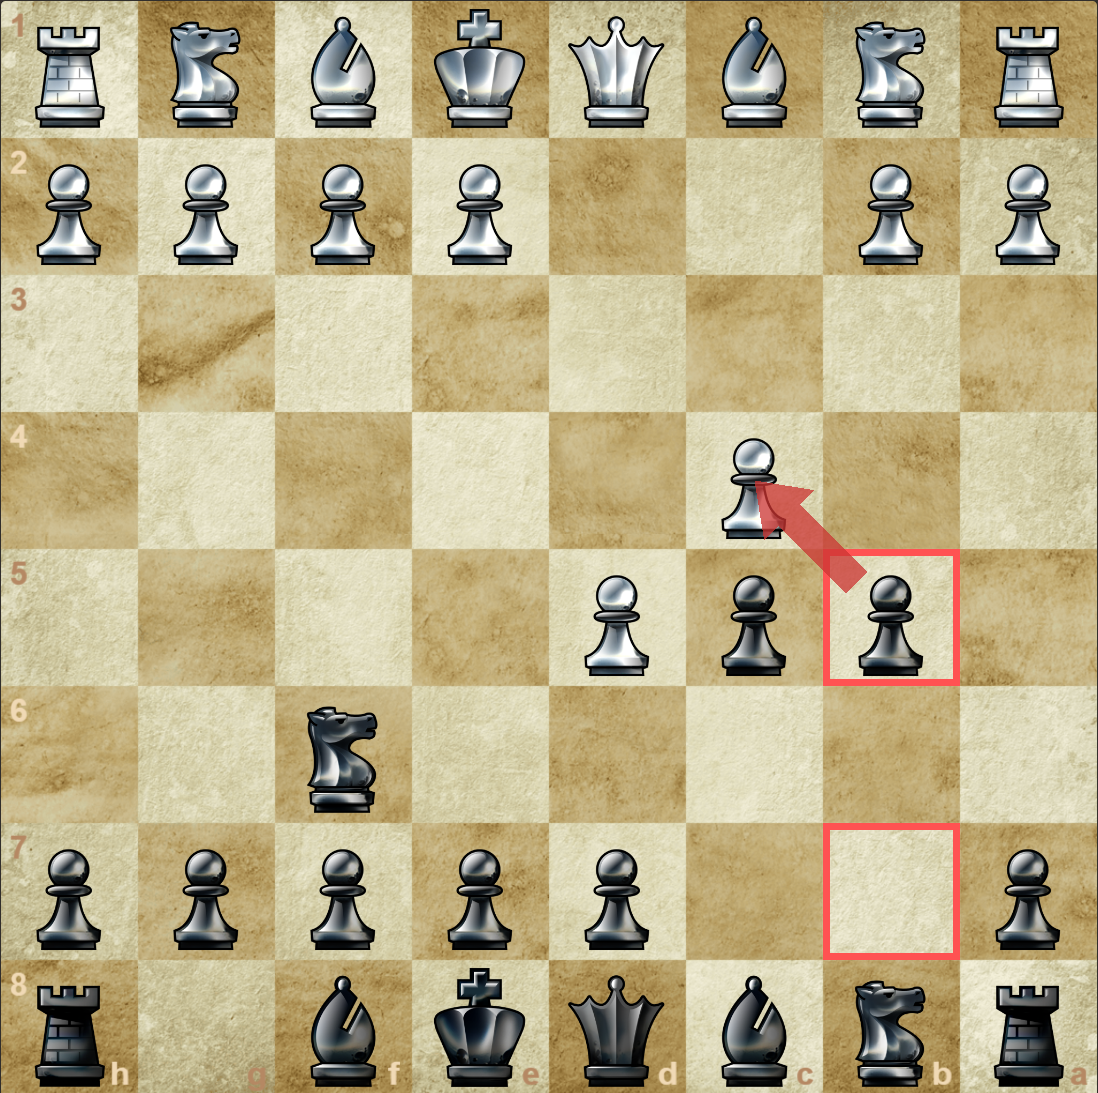 Getting Started With The King's Gambit - Pawnbreak